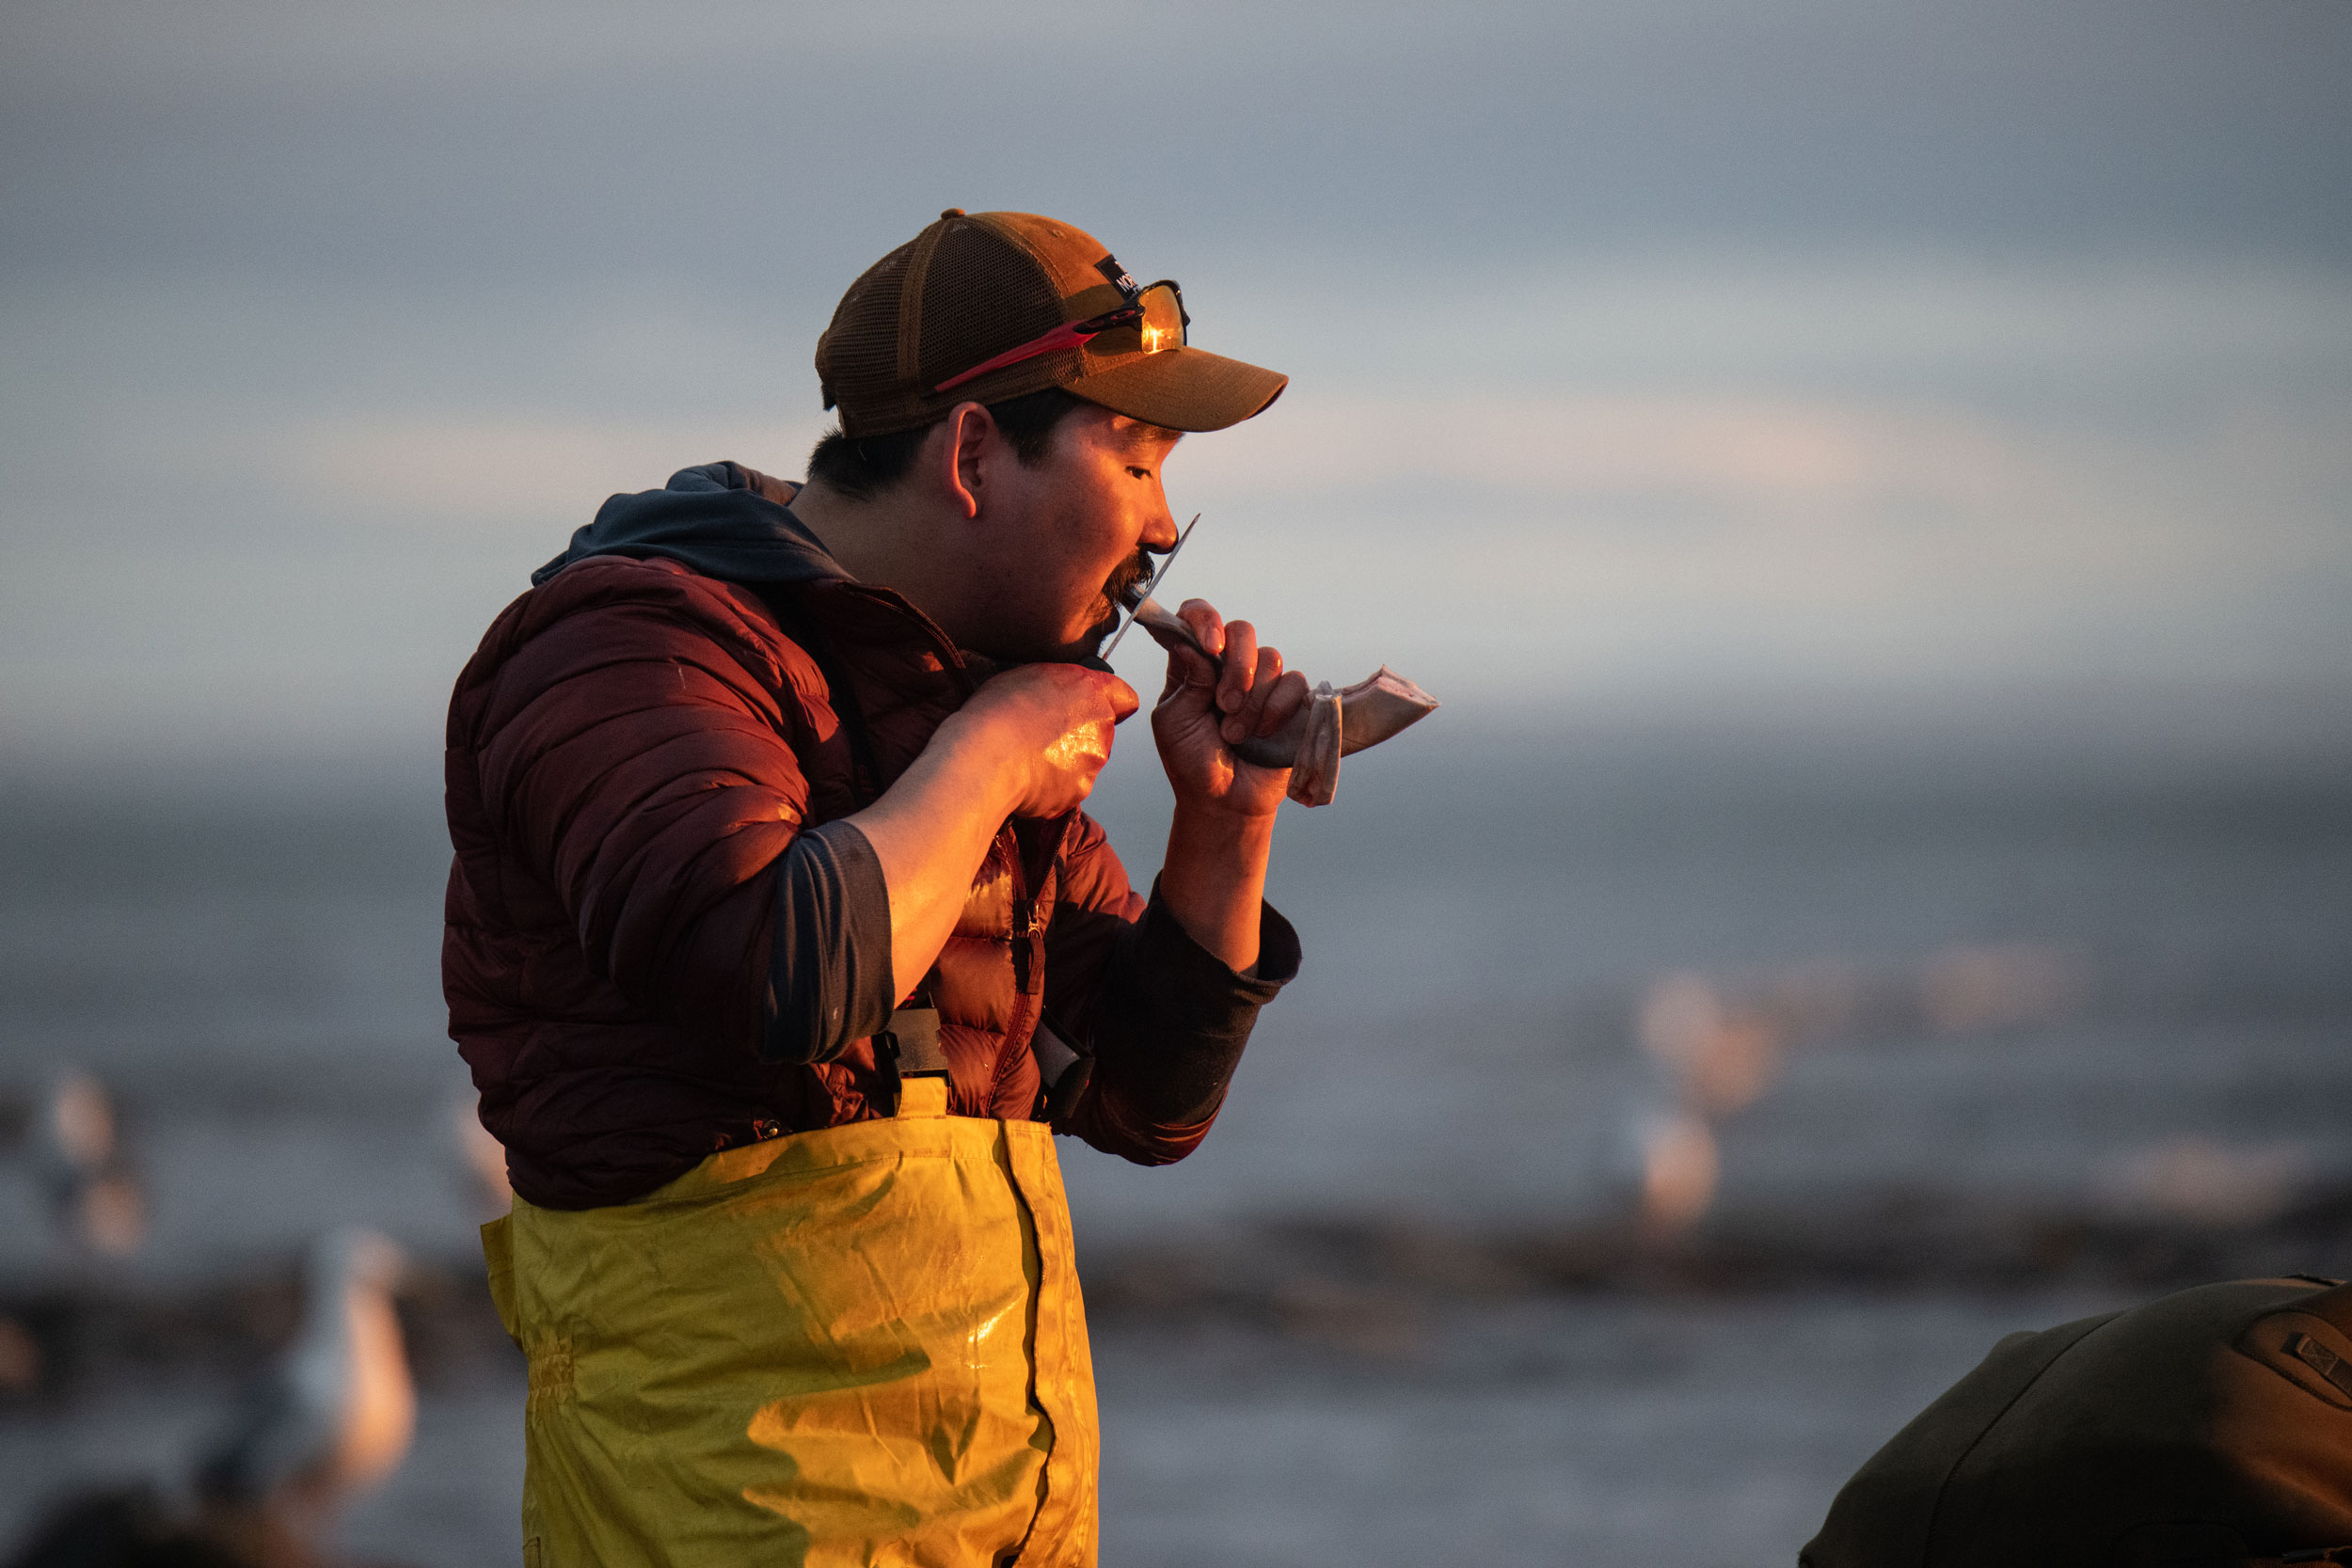 Andrew Muckpah, a Young Hunters program leader, cuts off a chunk of fresh beluga meat to chew on after a busy evening of hunting.